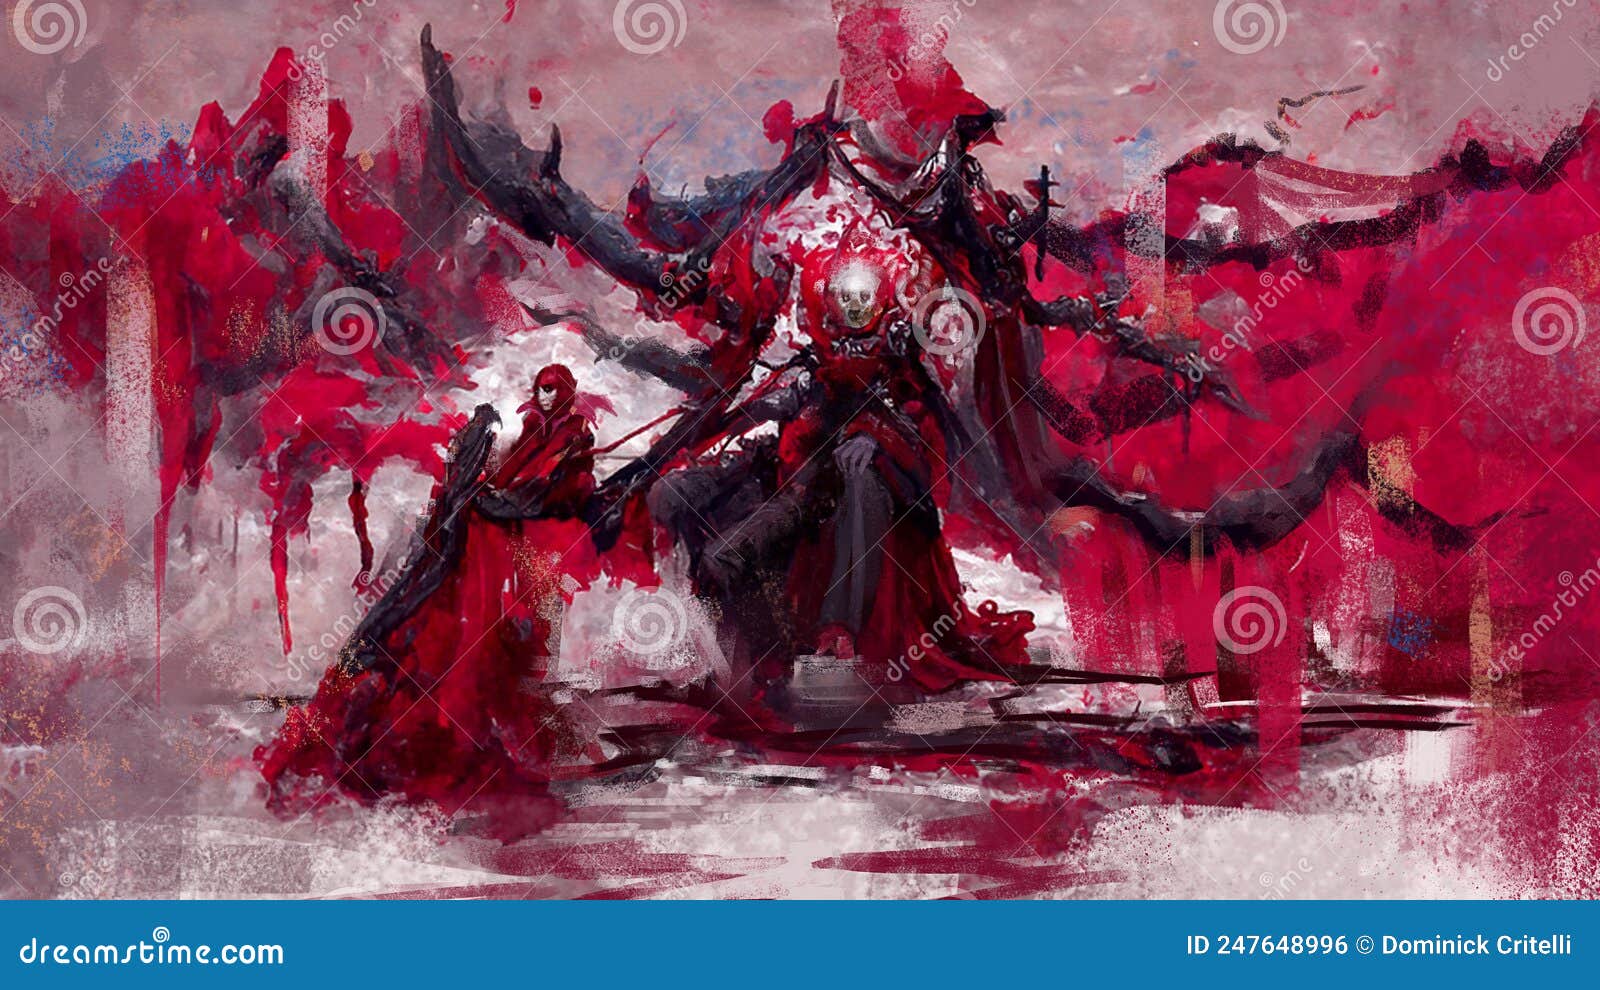 digital  of a red underworld demon character and his royal bride - fantasy painting